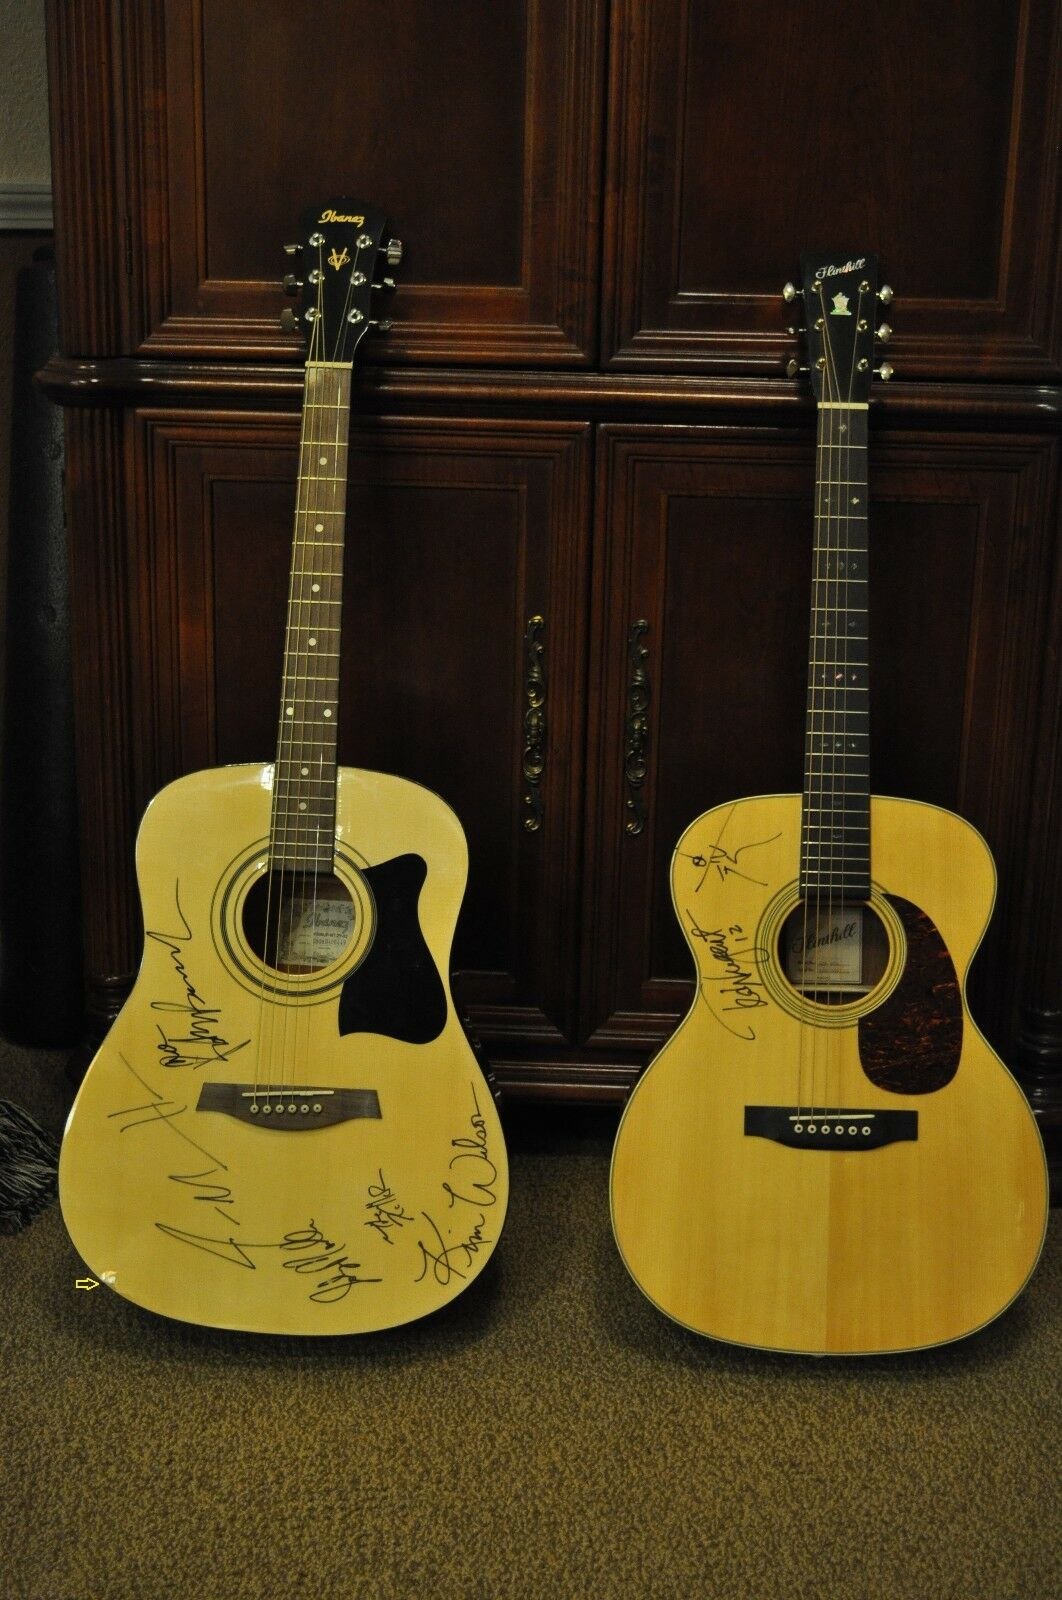 2 Acoustic Guitars Signed Autographed By Ted Nugent & The Fabulous Thunderbirds